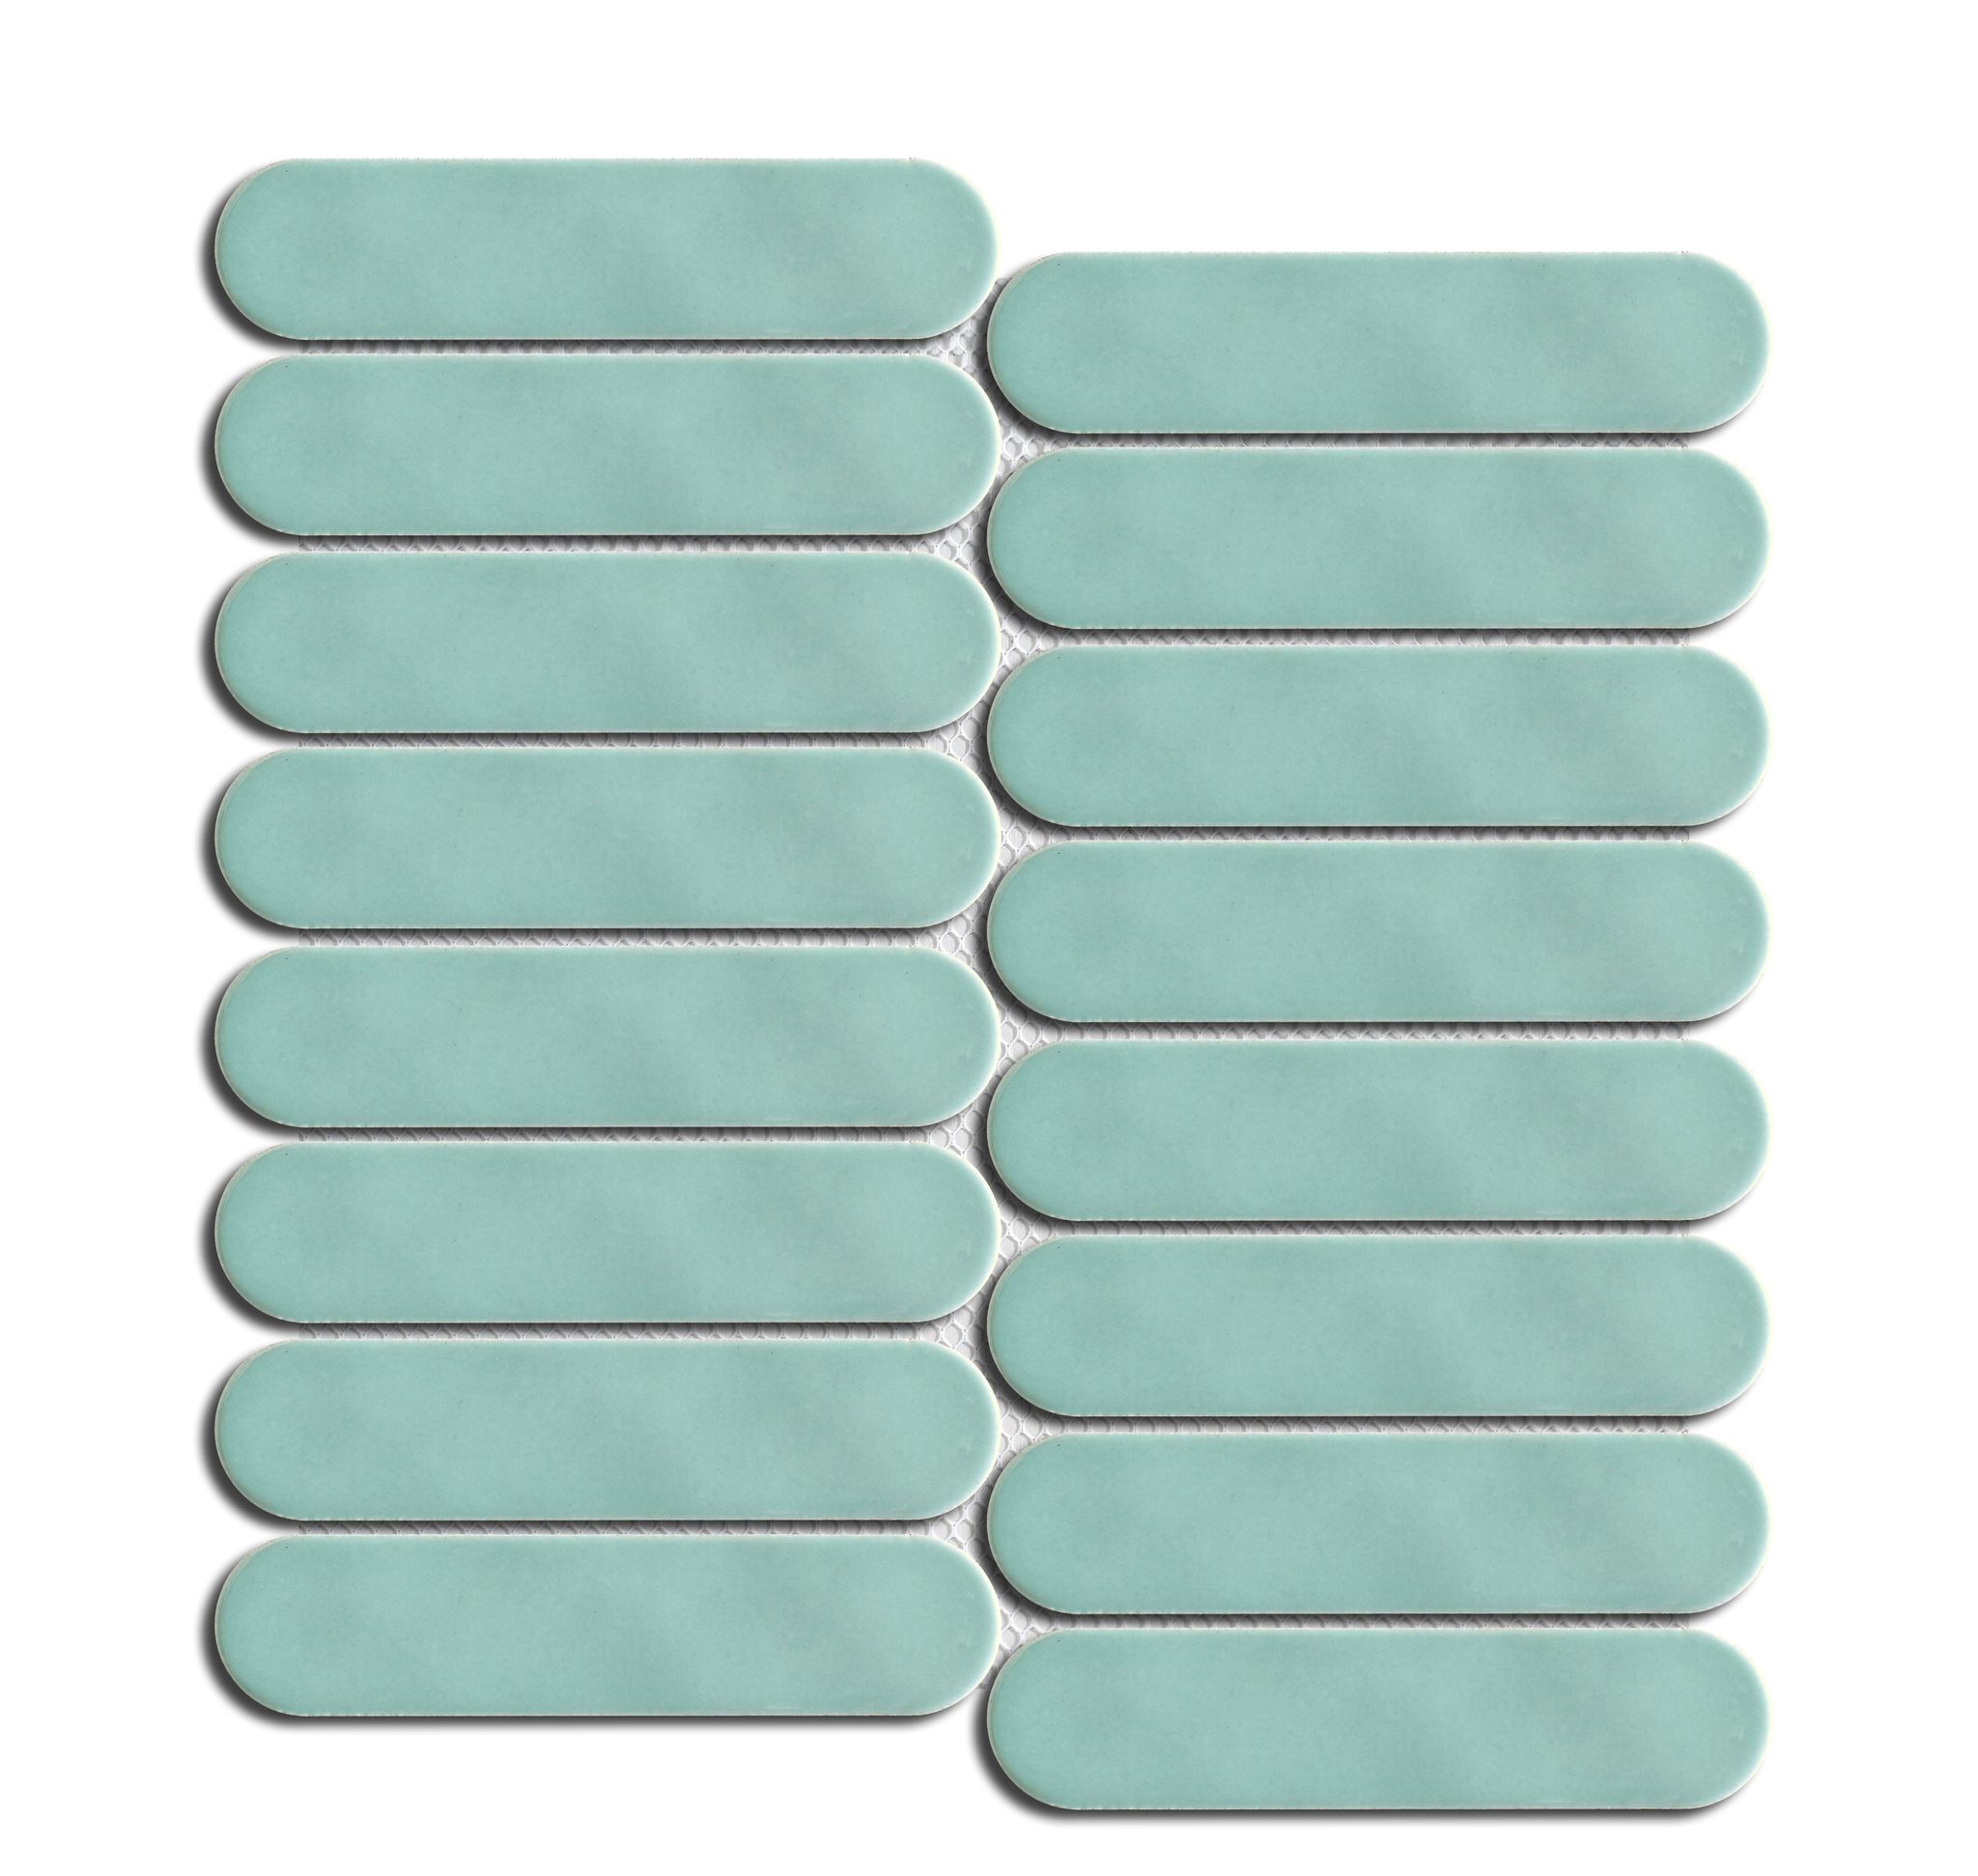 Mint Green Vintage | The Stones & More Group